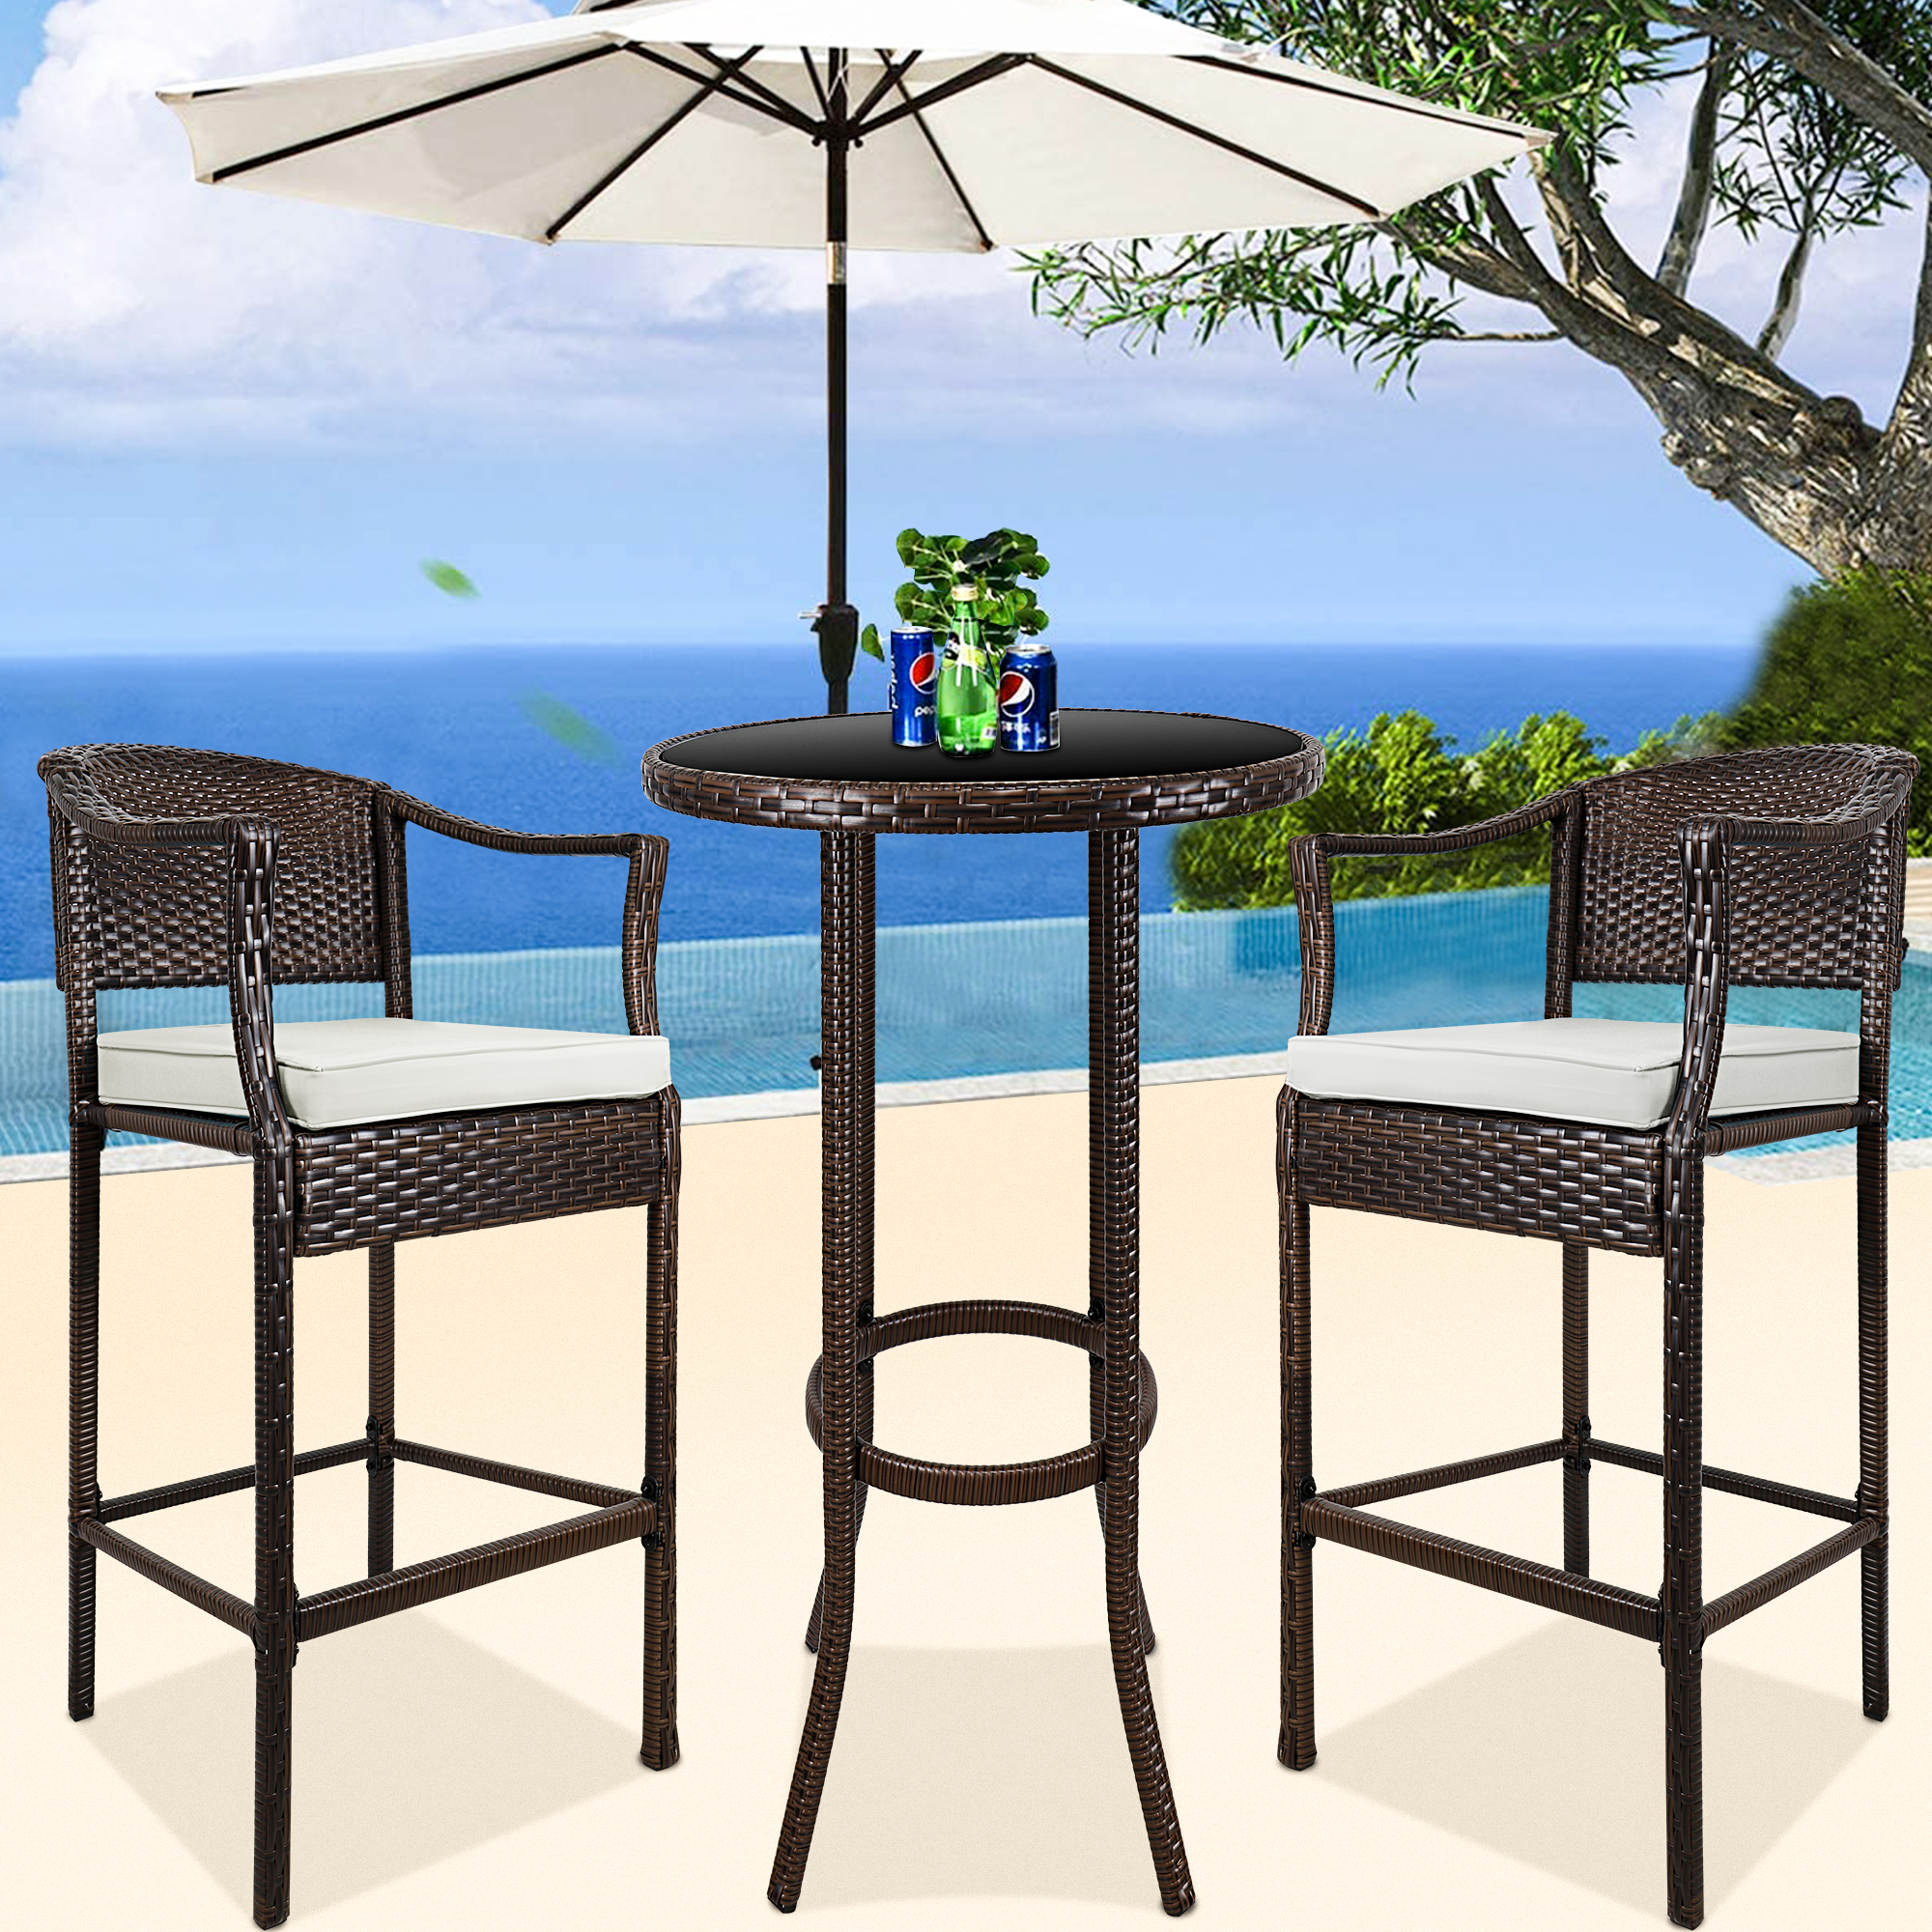 Patio Bistro Set, 3 Piece Outdoor Bar Table and Stools Set, 2 Patio Cushioned Bar Chairs with 1 High Glass Top Table, All Weather PE Rattan Furniture Set for Garden Yard Balcony Poolside Cafe, B16 - image 2 of 9